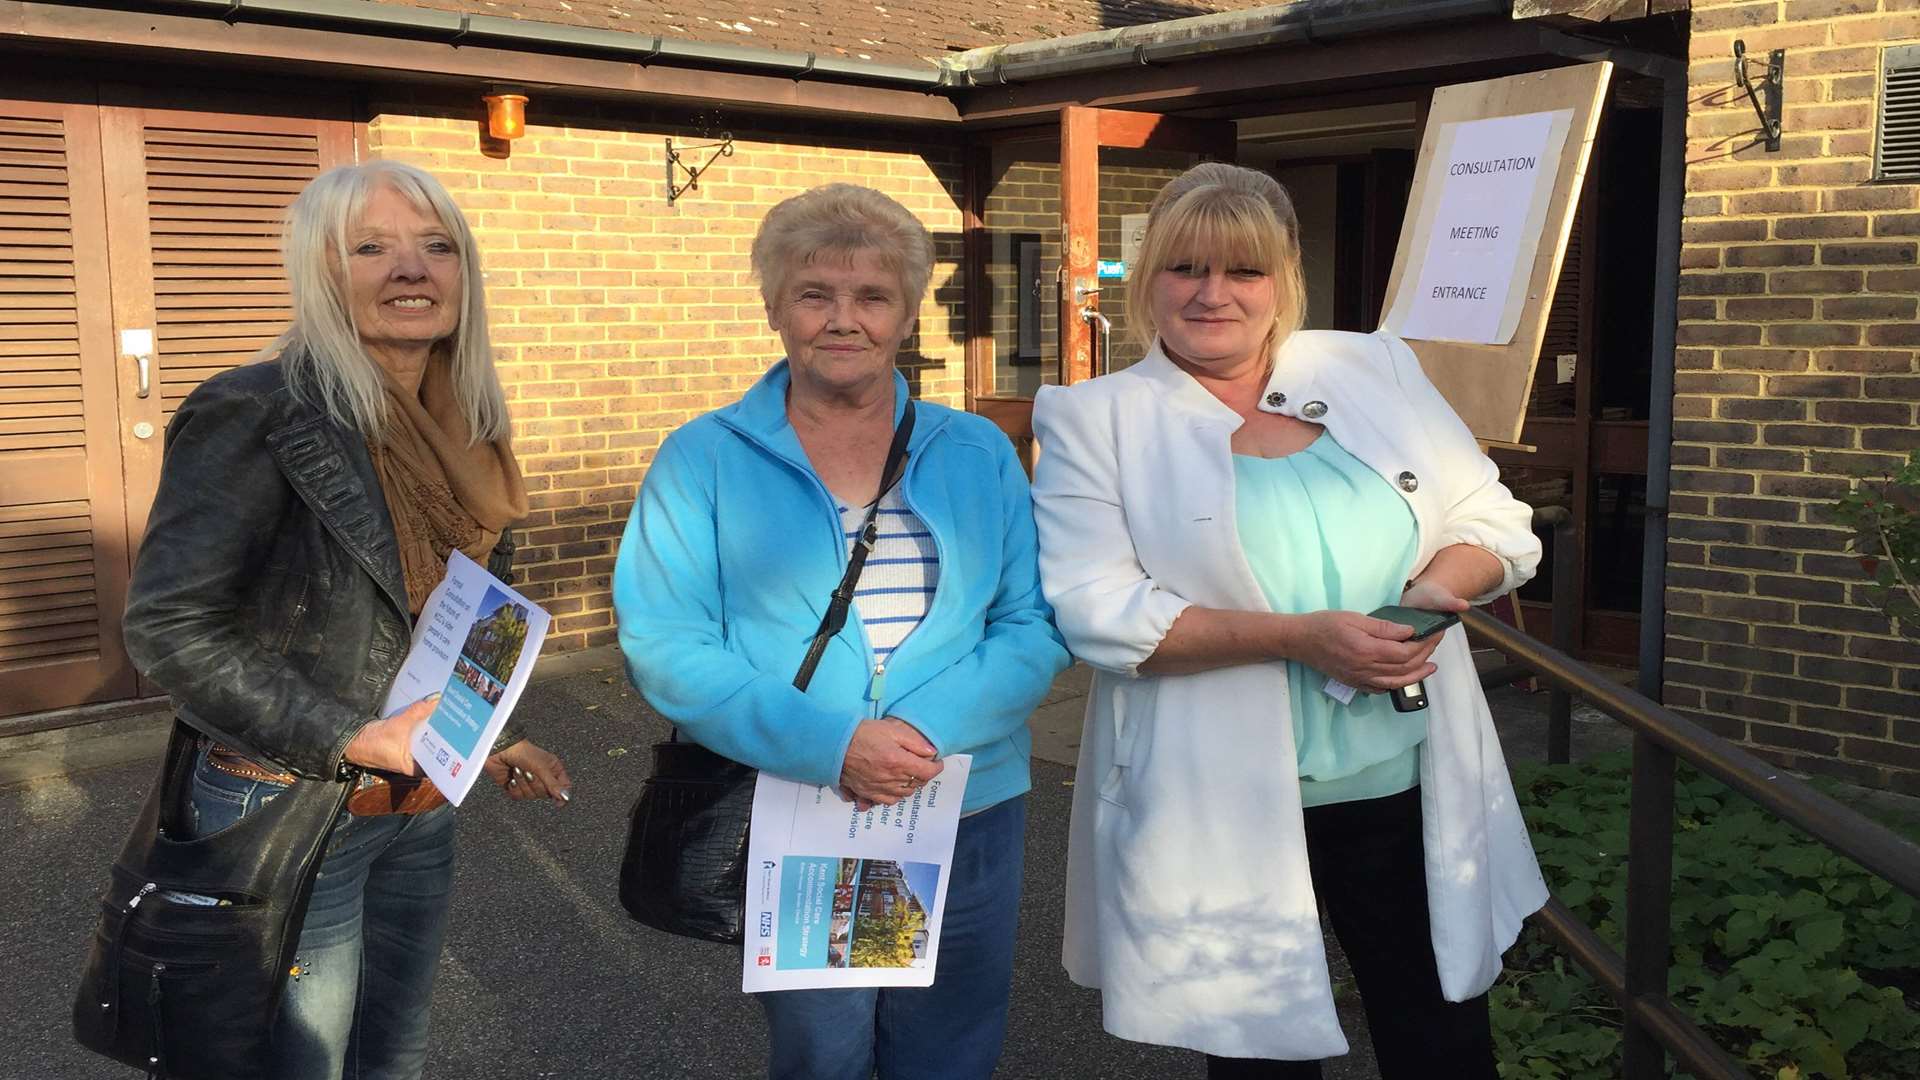 Sue Black, Christine Mills and Anna Ralph, all worried at proposals to close the Dorothy Lucy care home in Maidstone